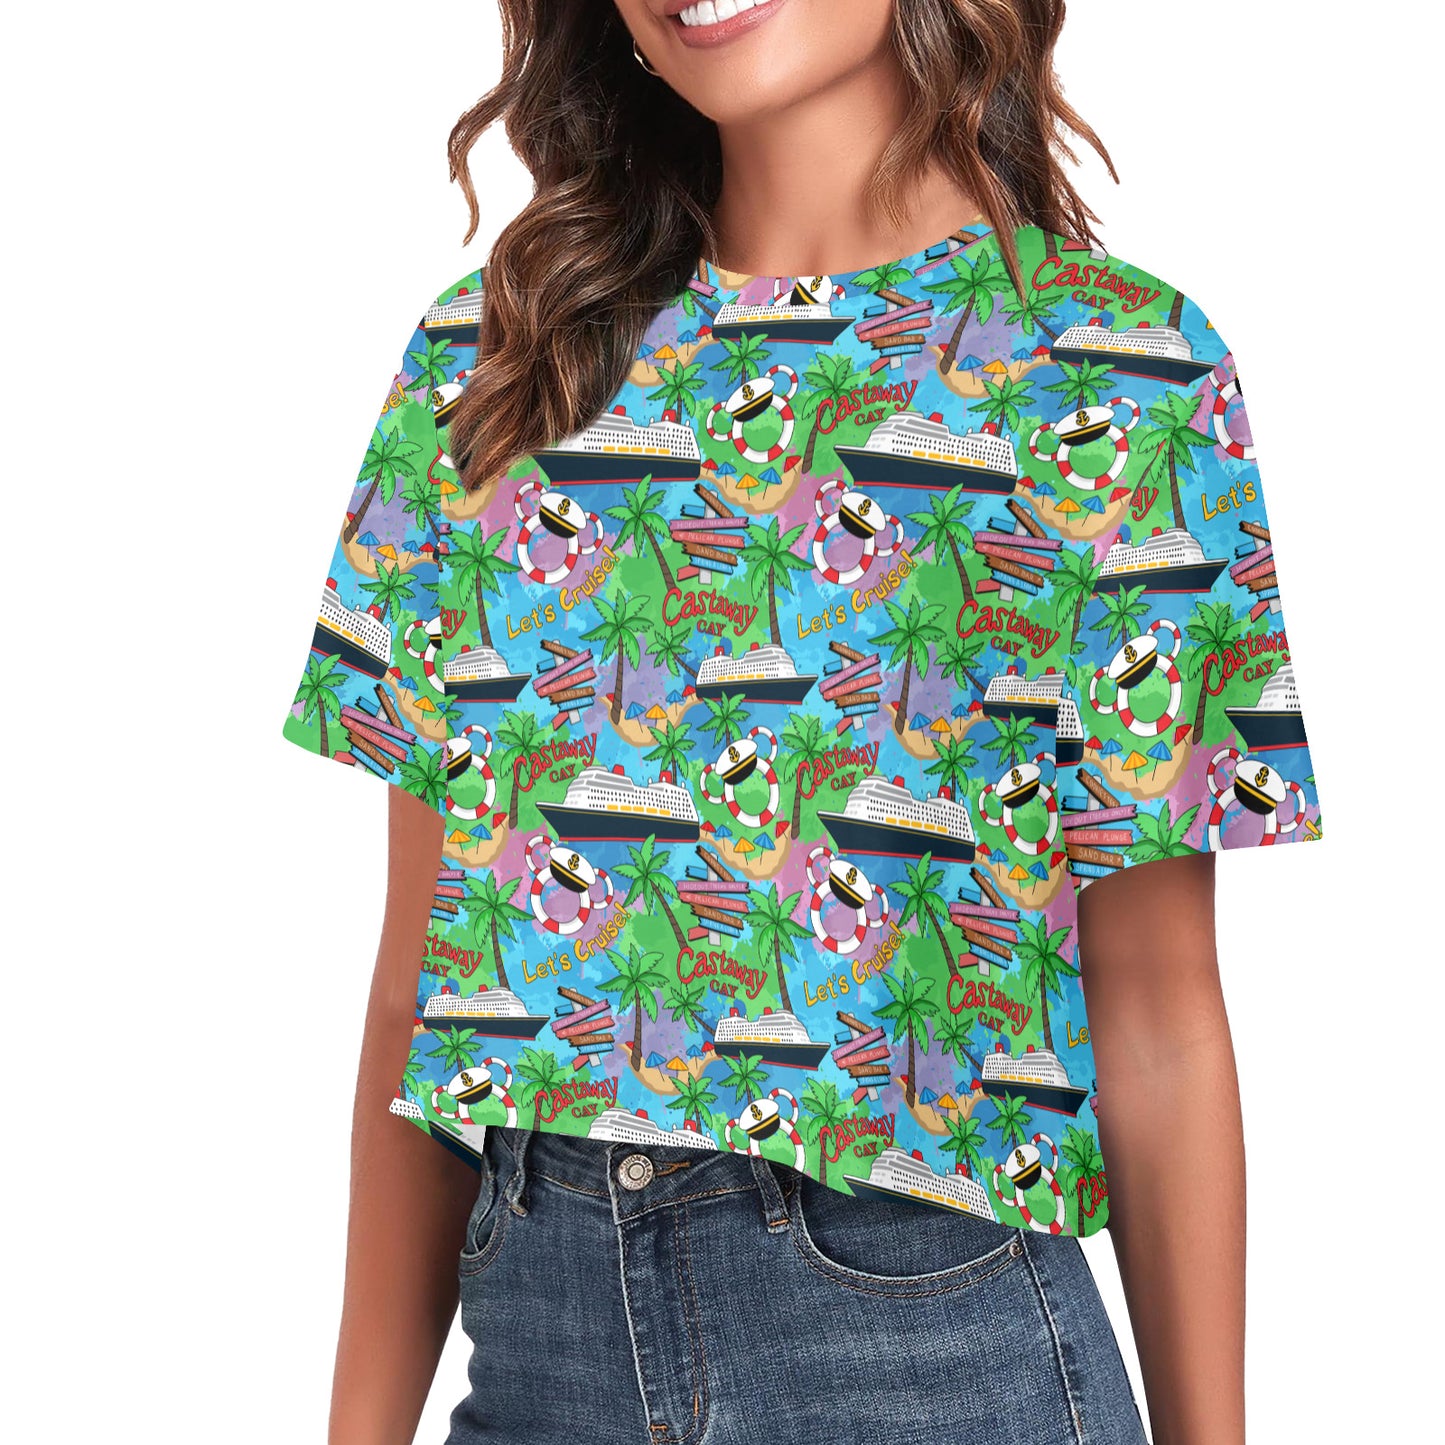 Let's Cruise Women's Cropped T-shirt